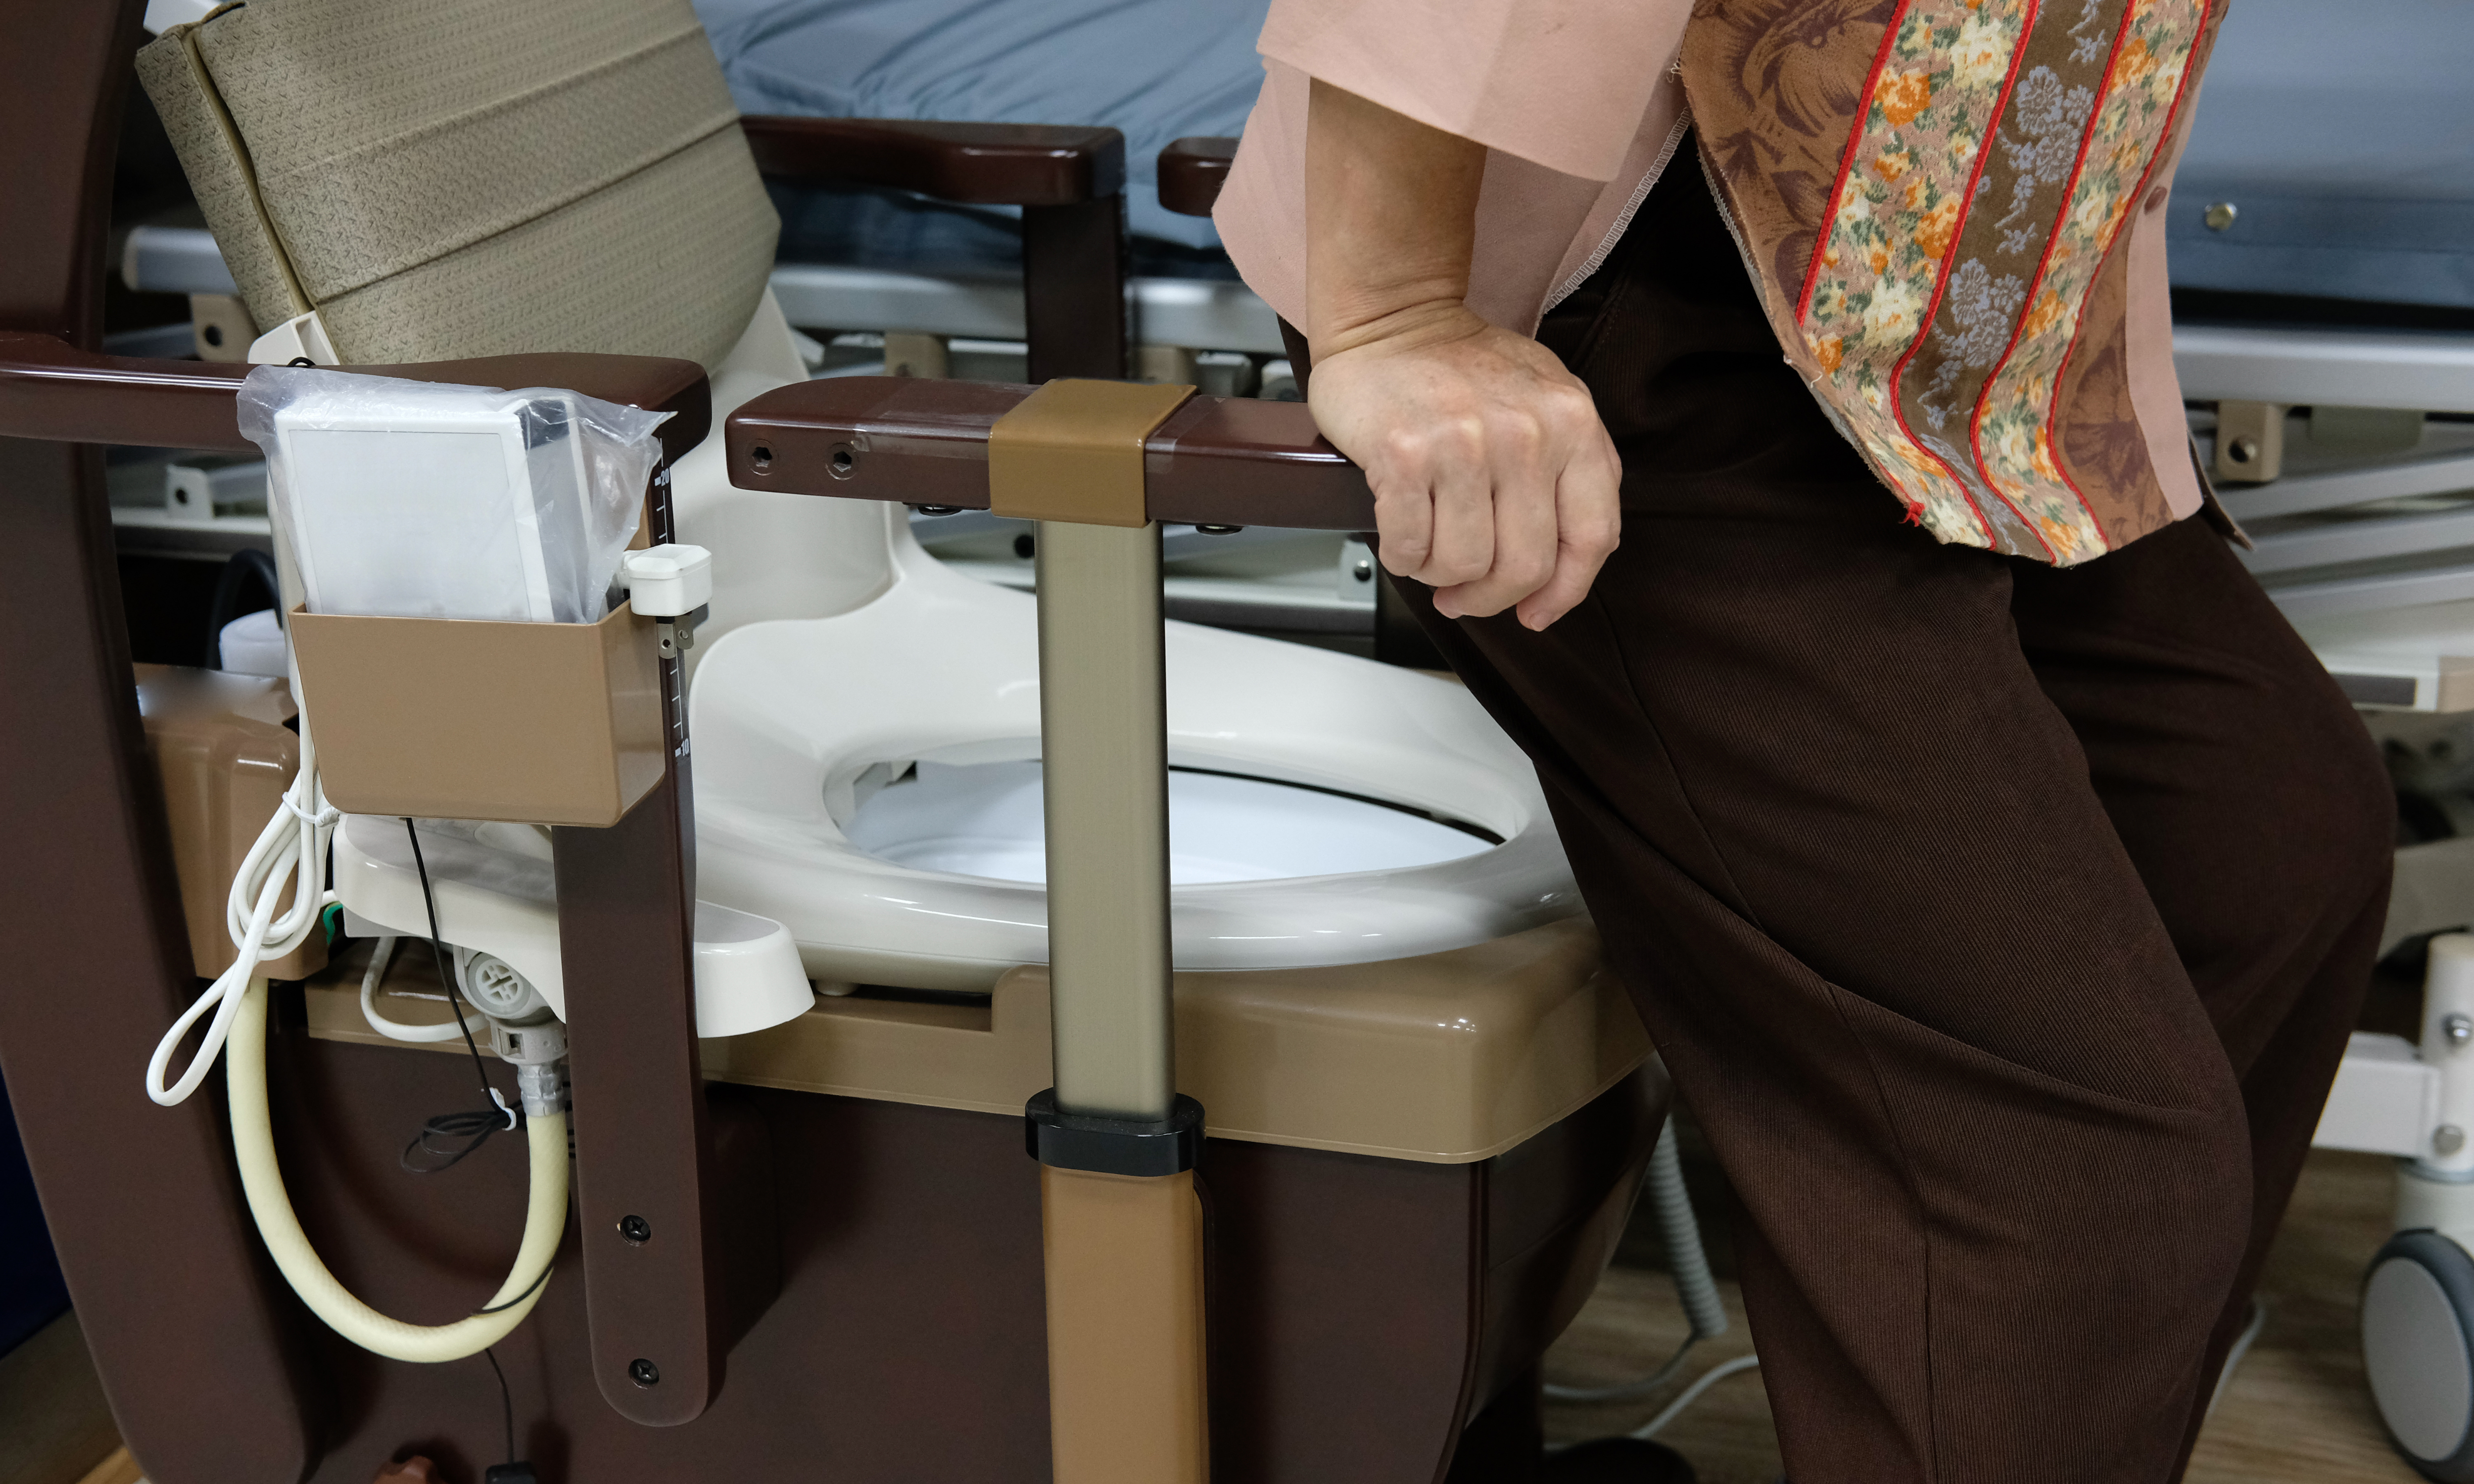 An older person sitting down on a commode.